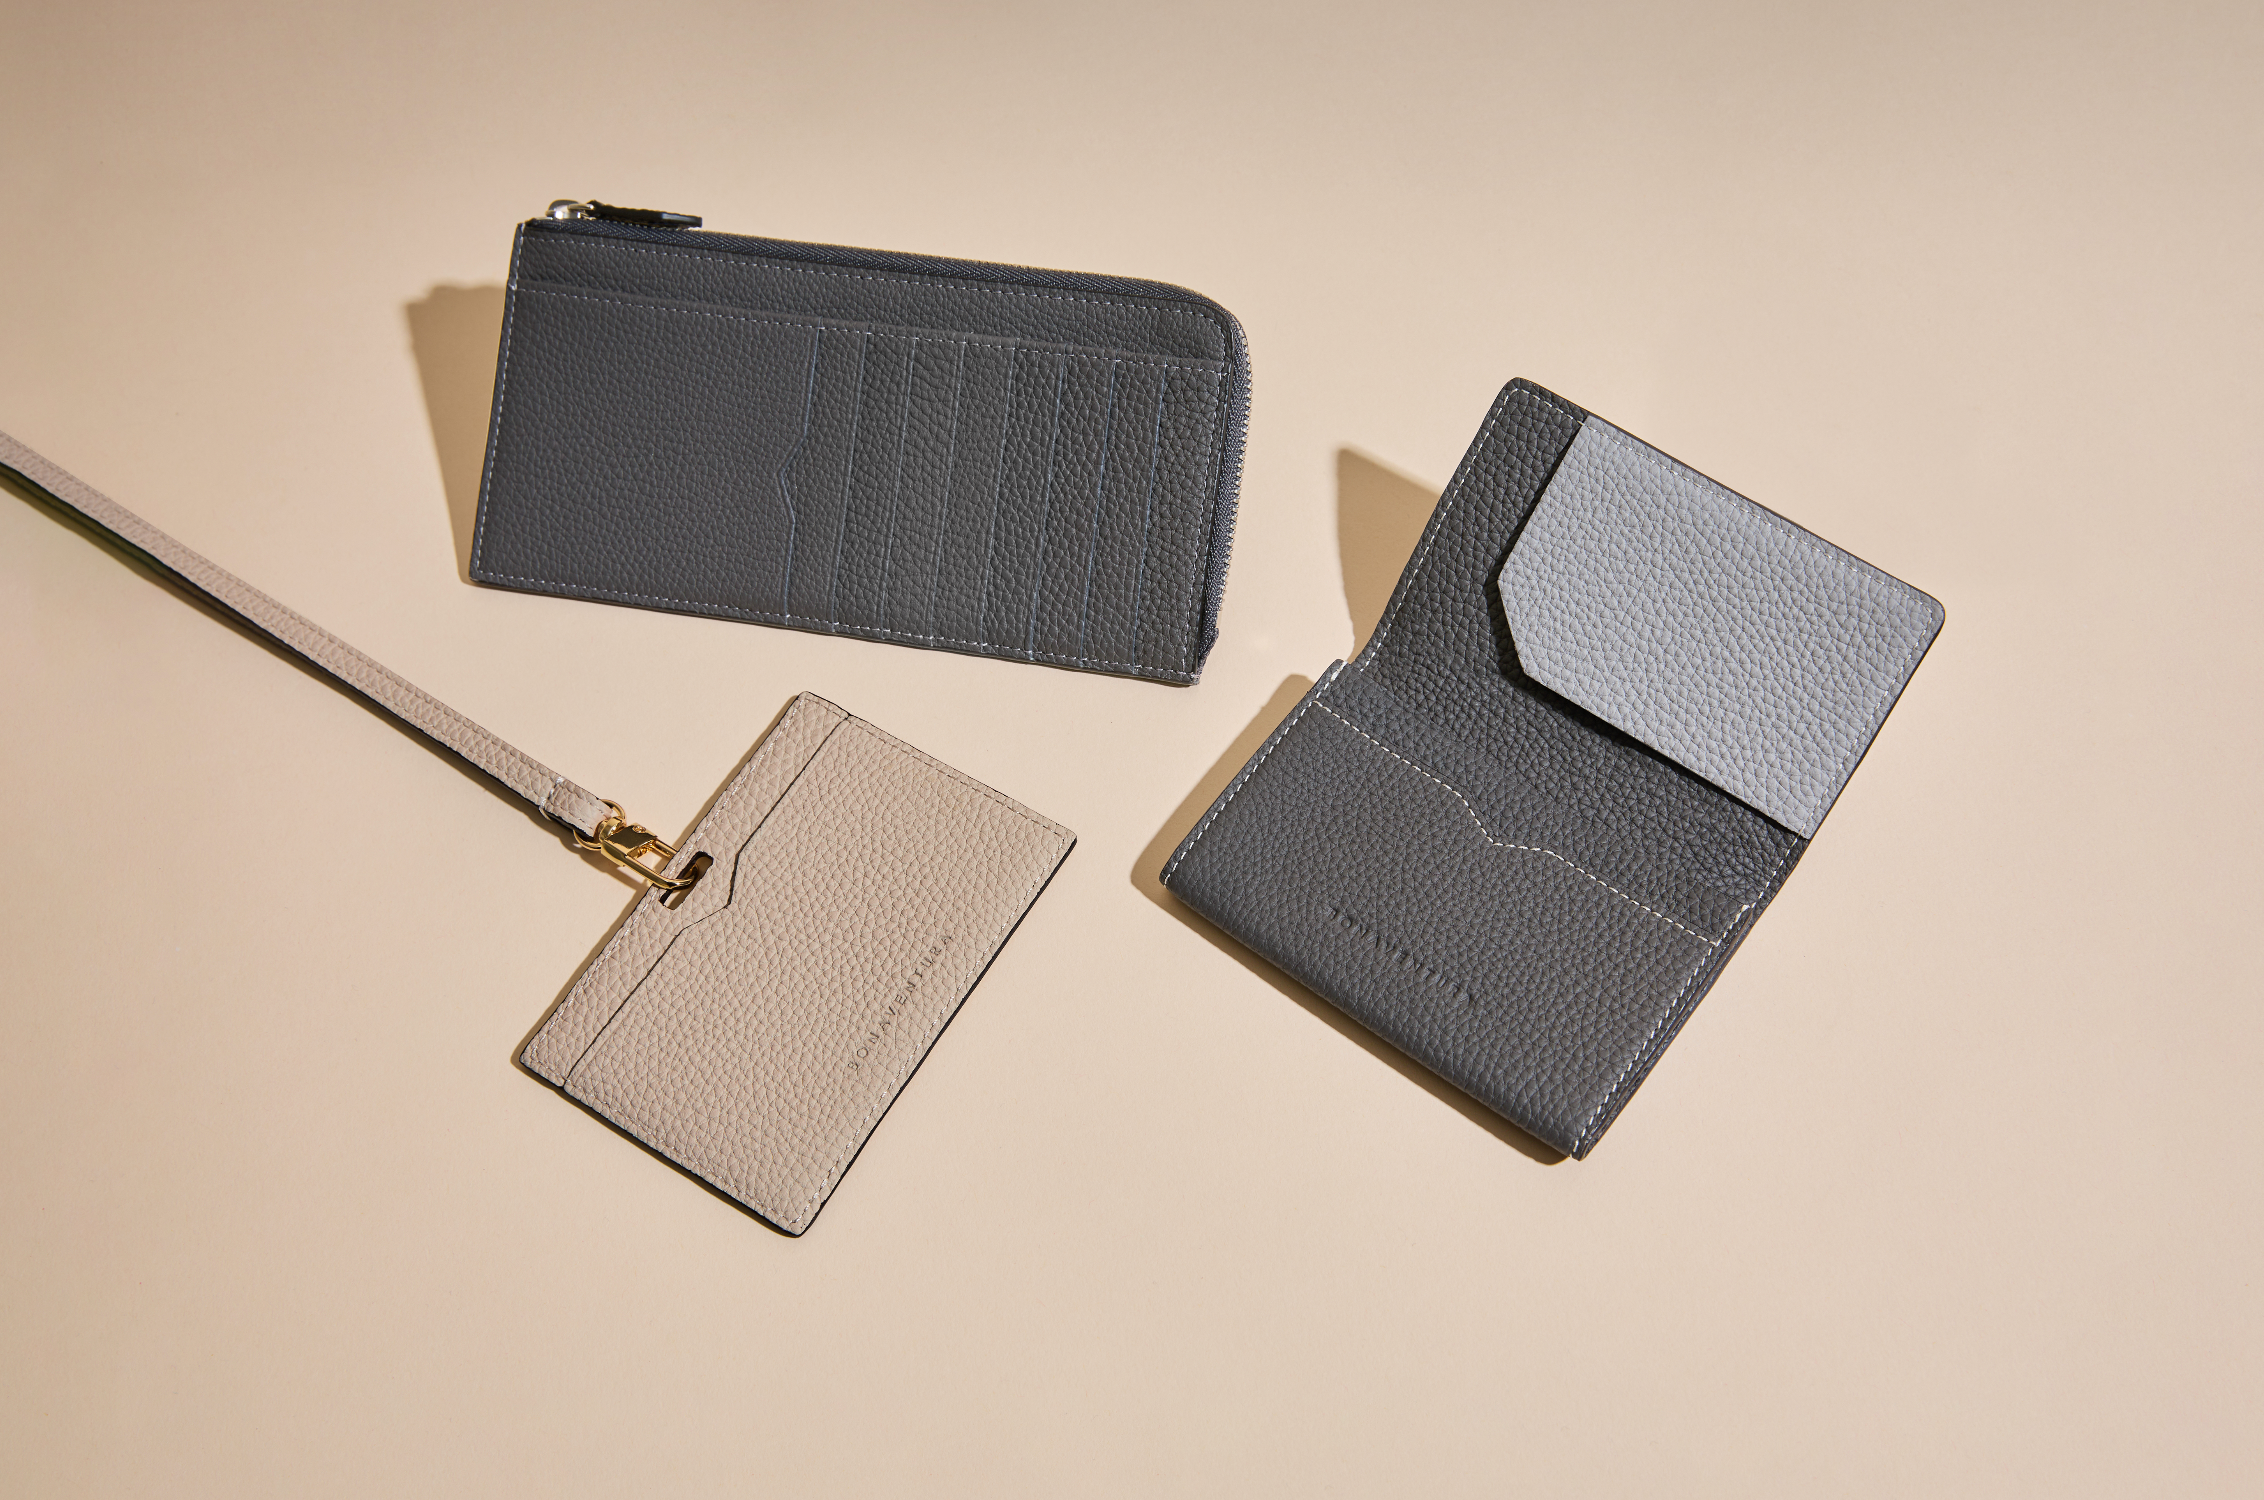 A selection of high-quality men's leather accessories, such as cardholders and wallets from BONAVENTURA.